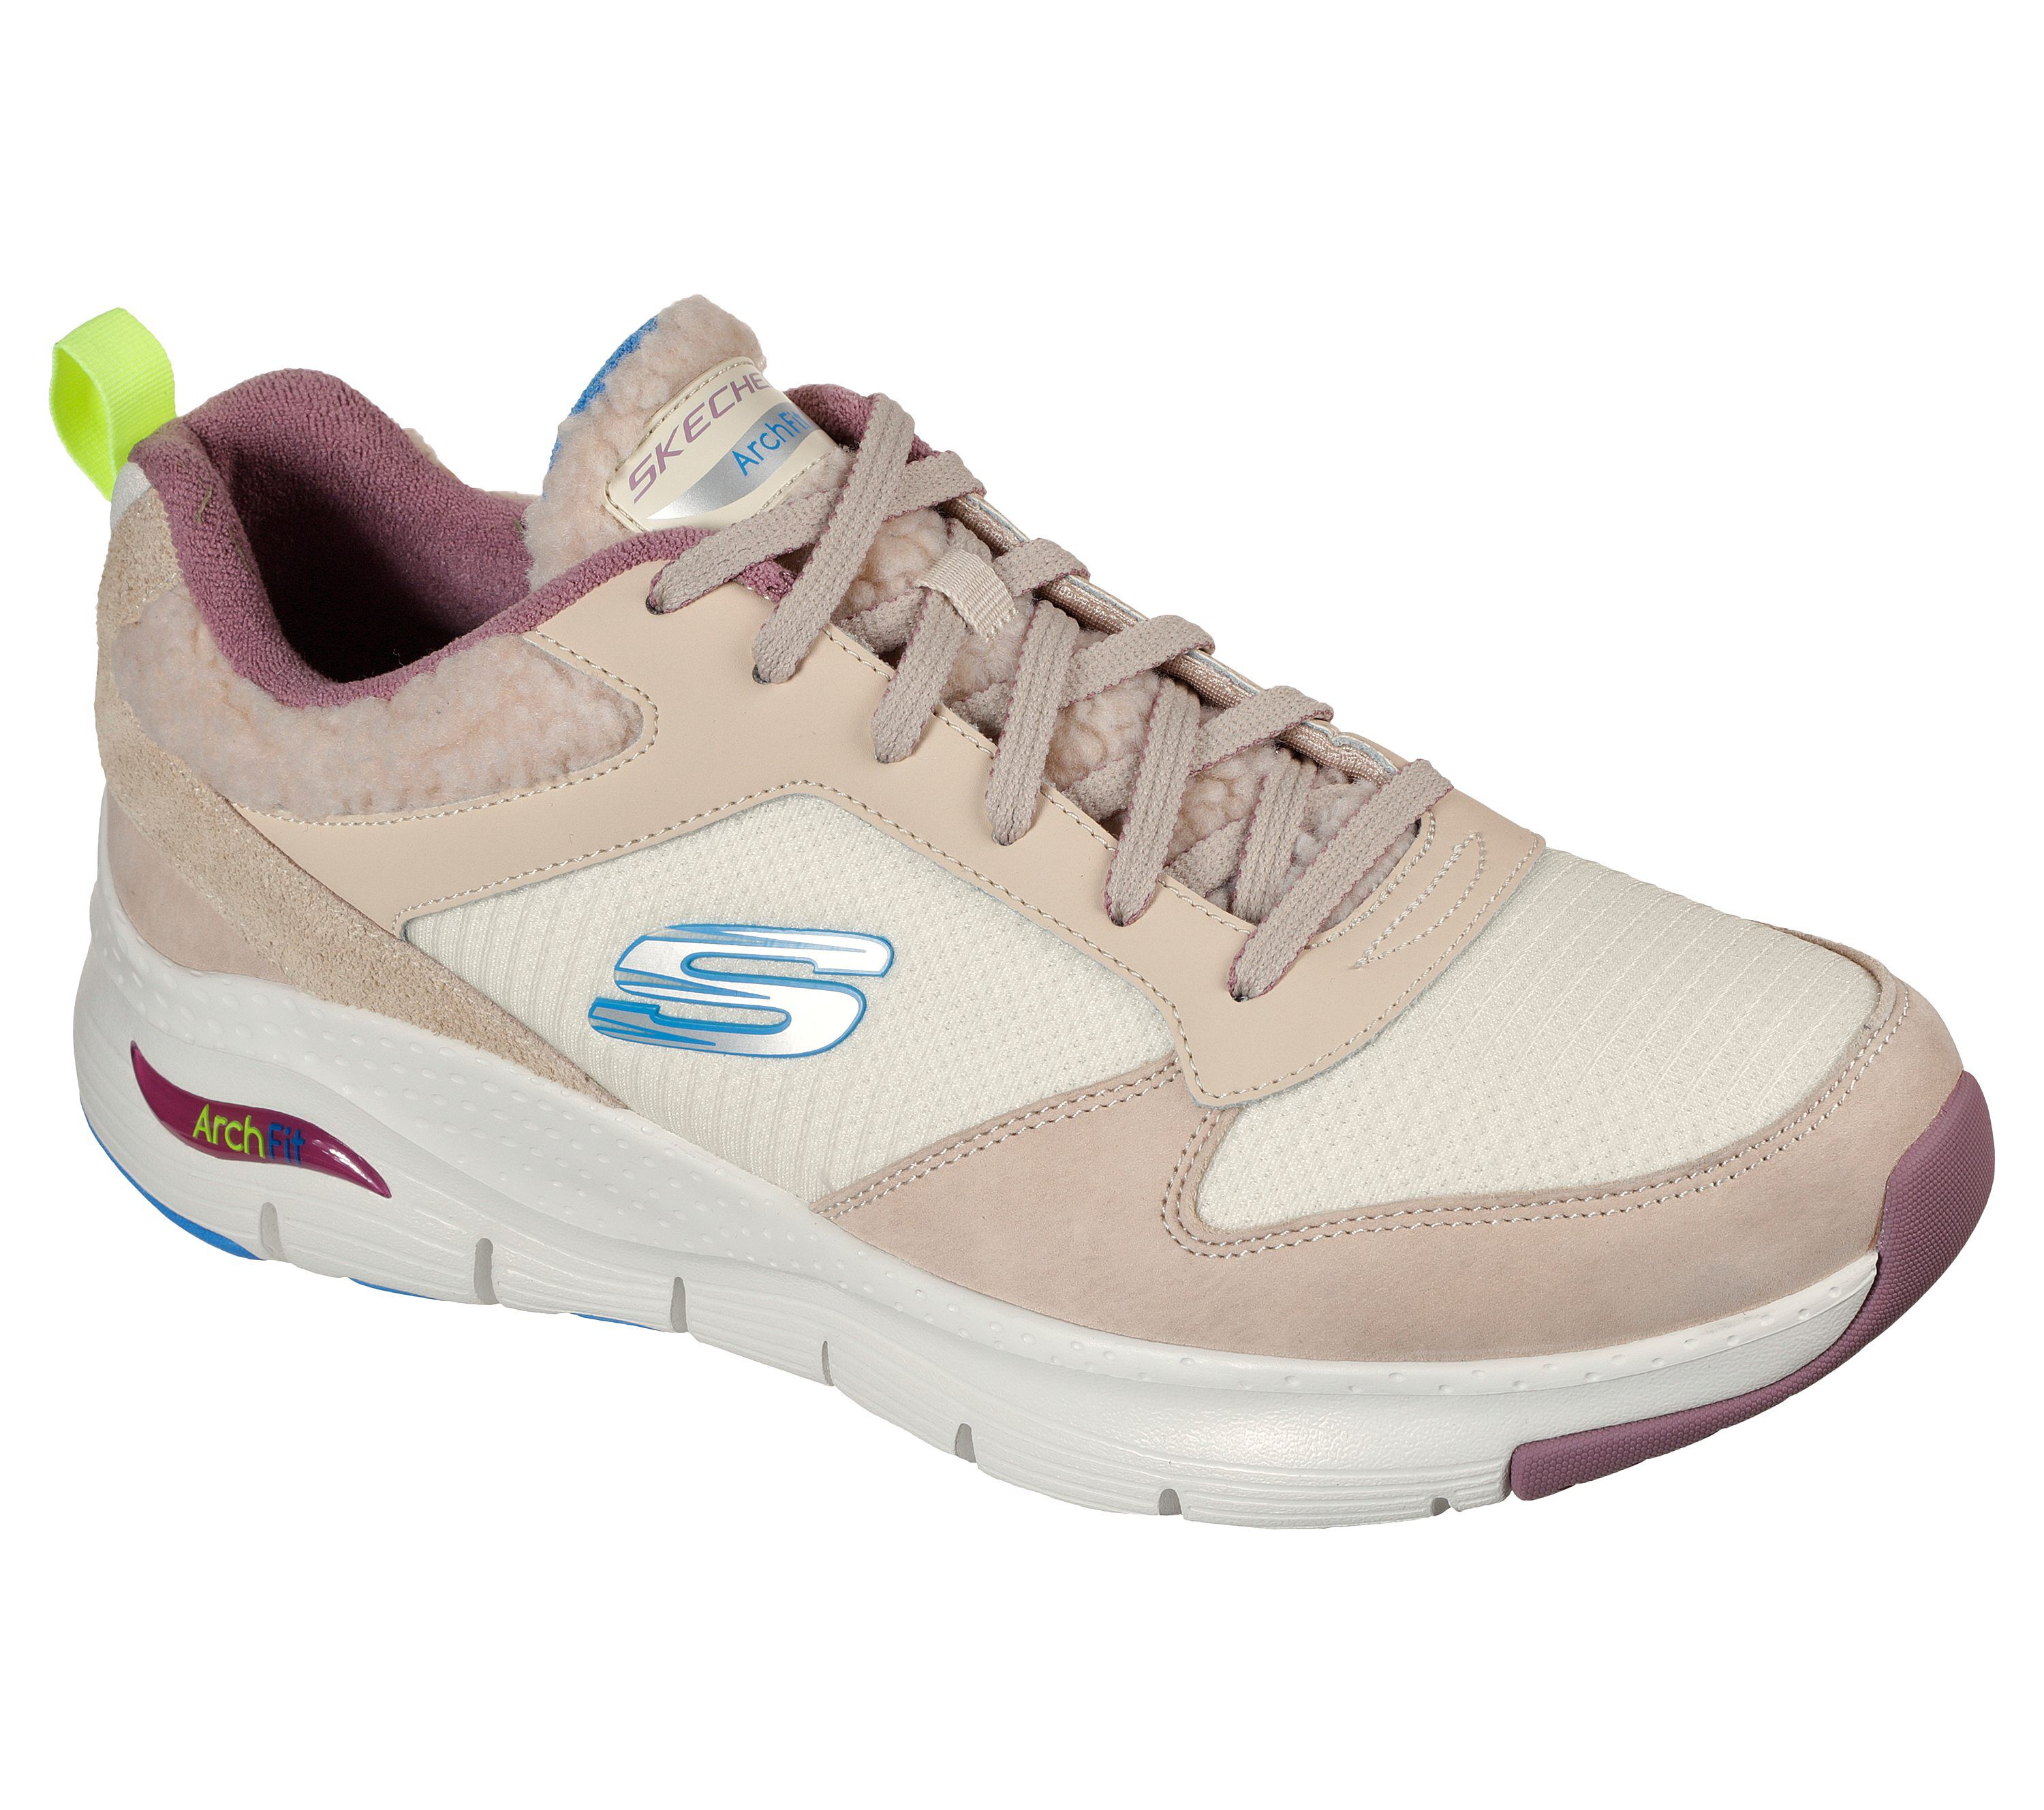 skechers shoes guildford